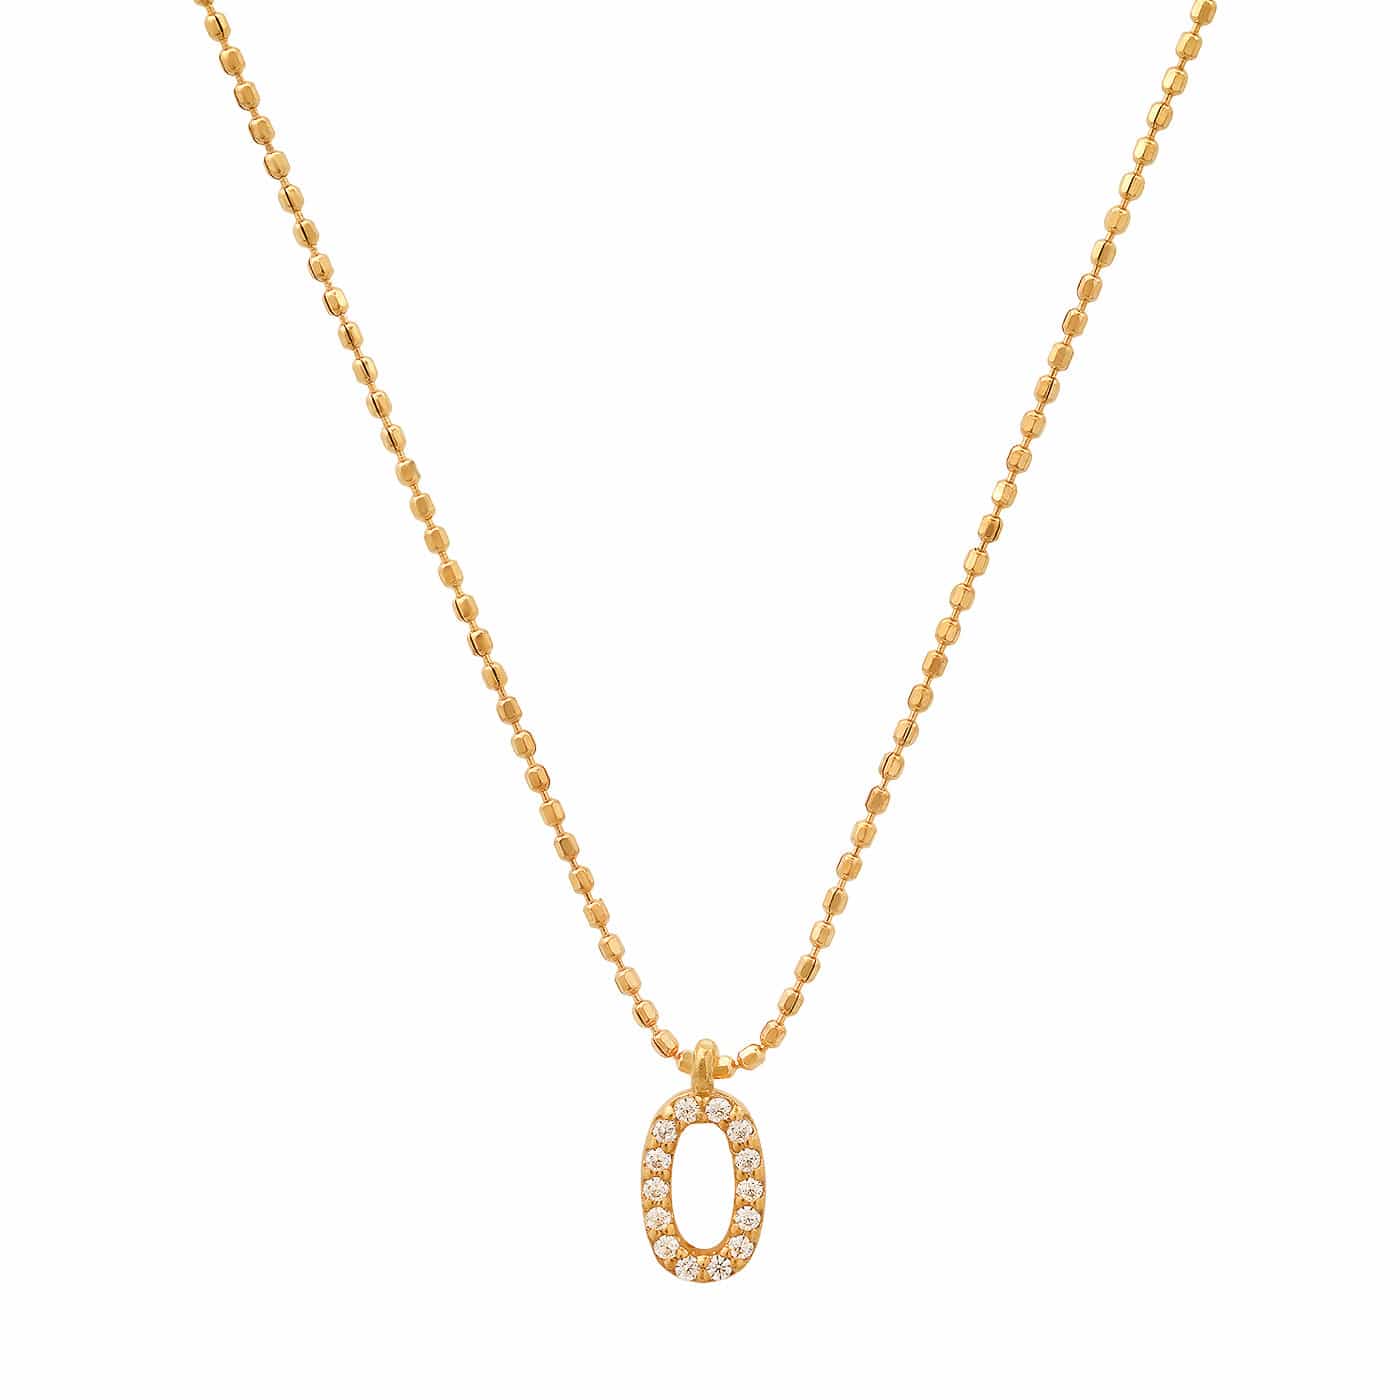 TAI JEWELRY Necklace O Pave Initial Ball Chain Necklace